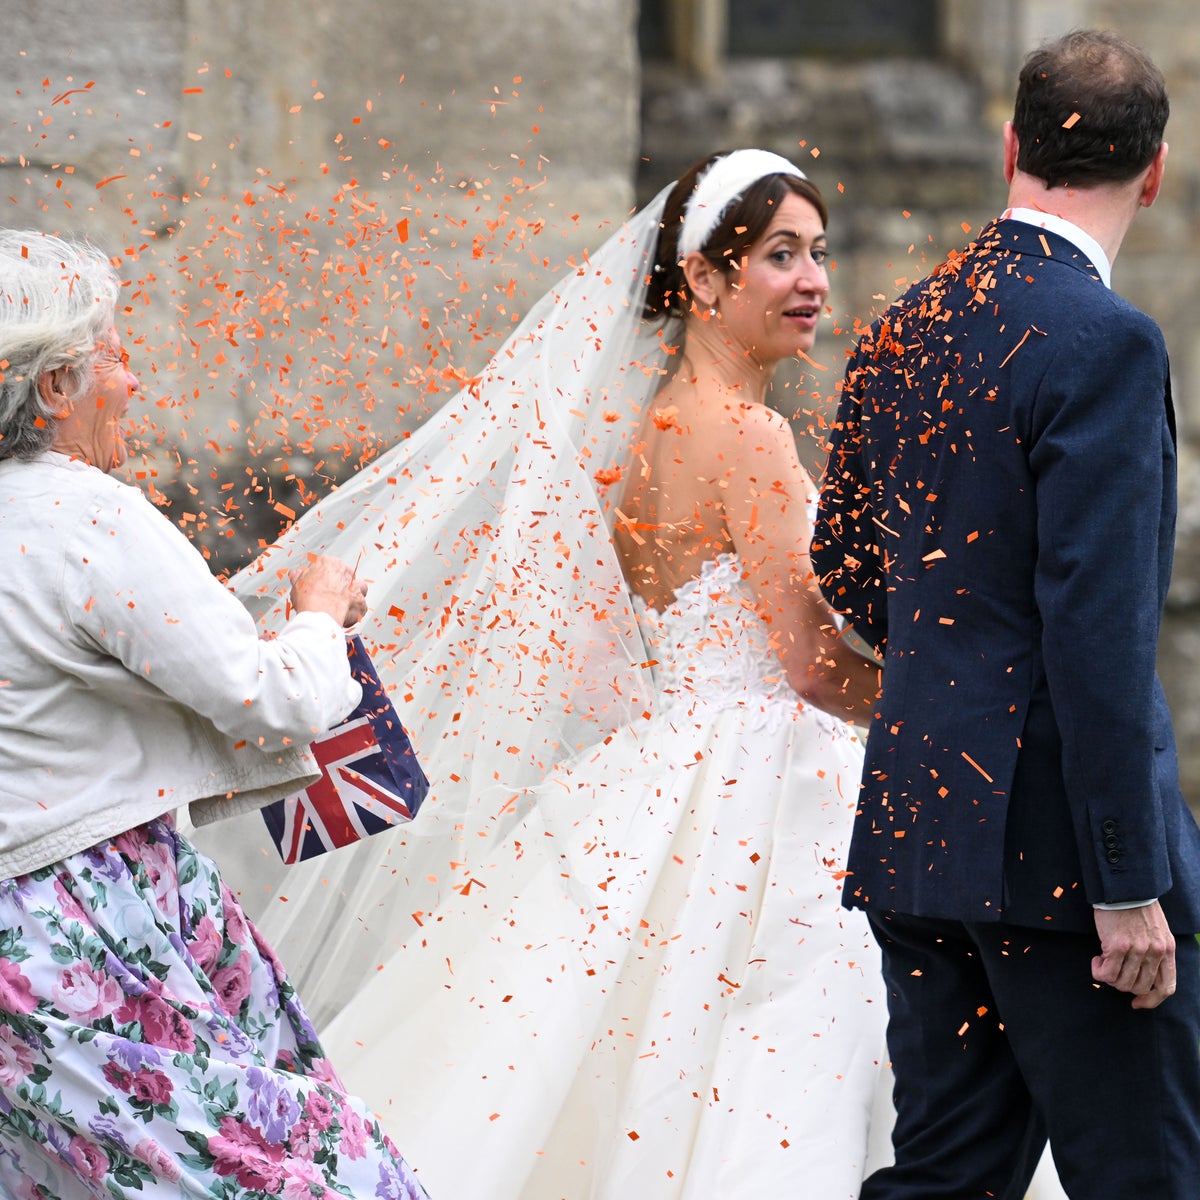 Confettigate: A Statement From Just Stop Oil The lady who threw confetti in Bruton yesterday was upholding a tradition that is common across many cultures. We absolutely defend the right for people to throw confetti (of whatever colour) at weddings and other celebrations. If it